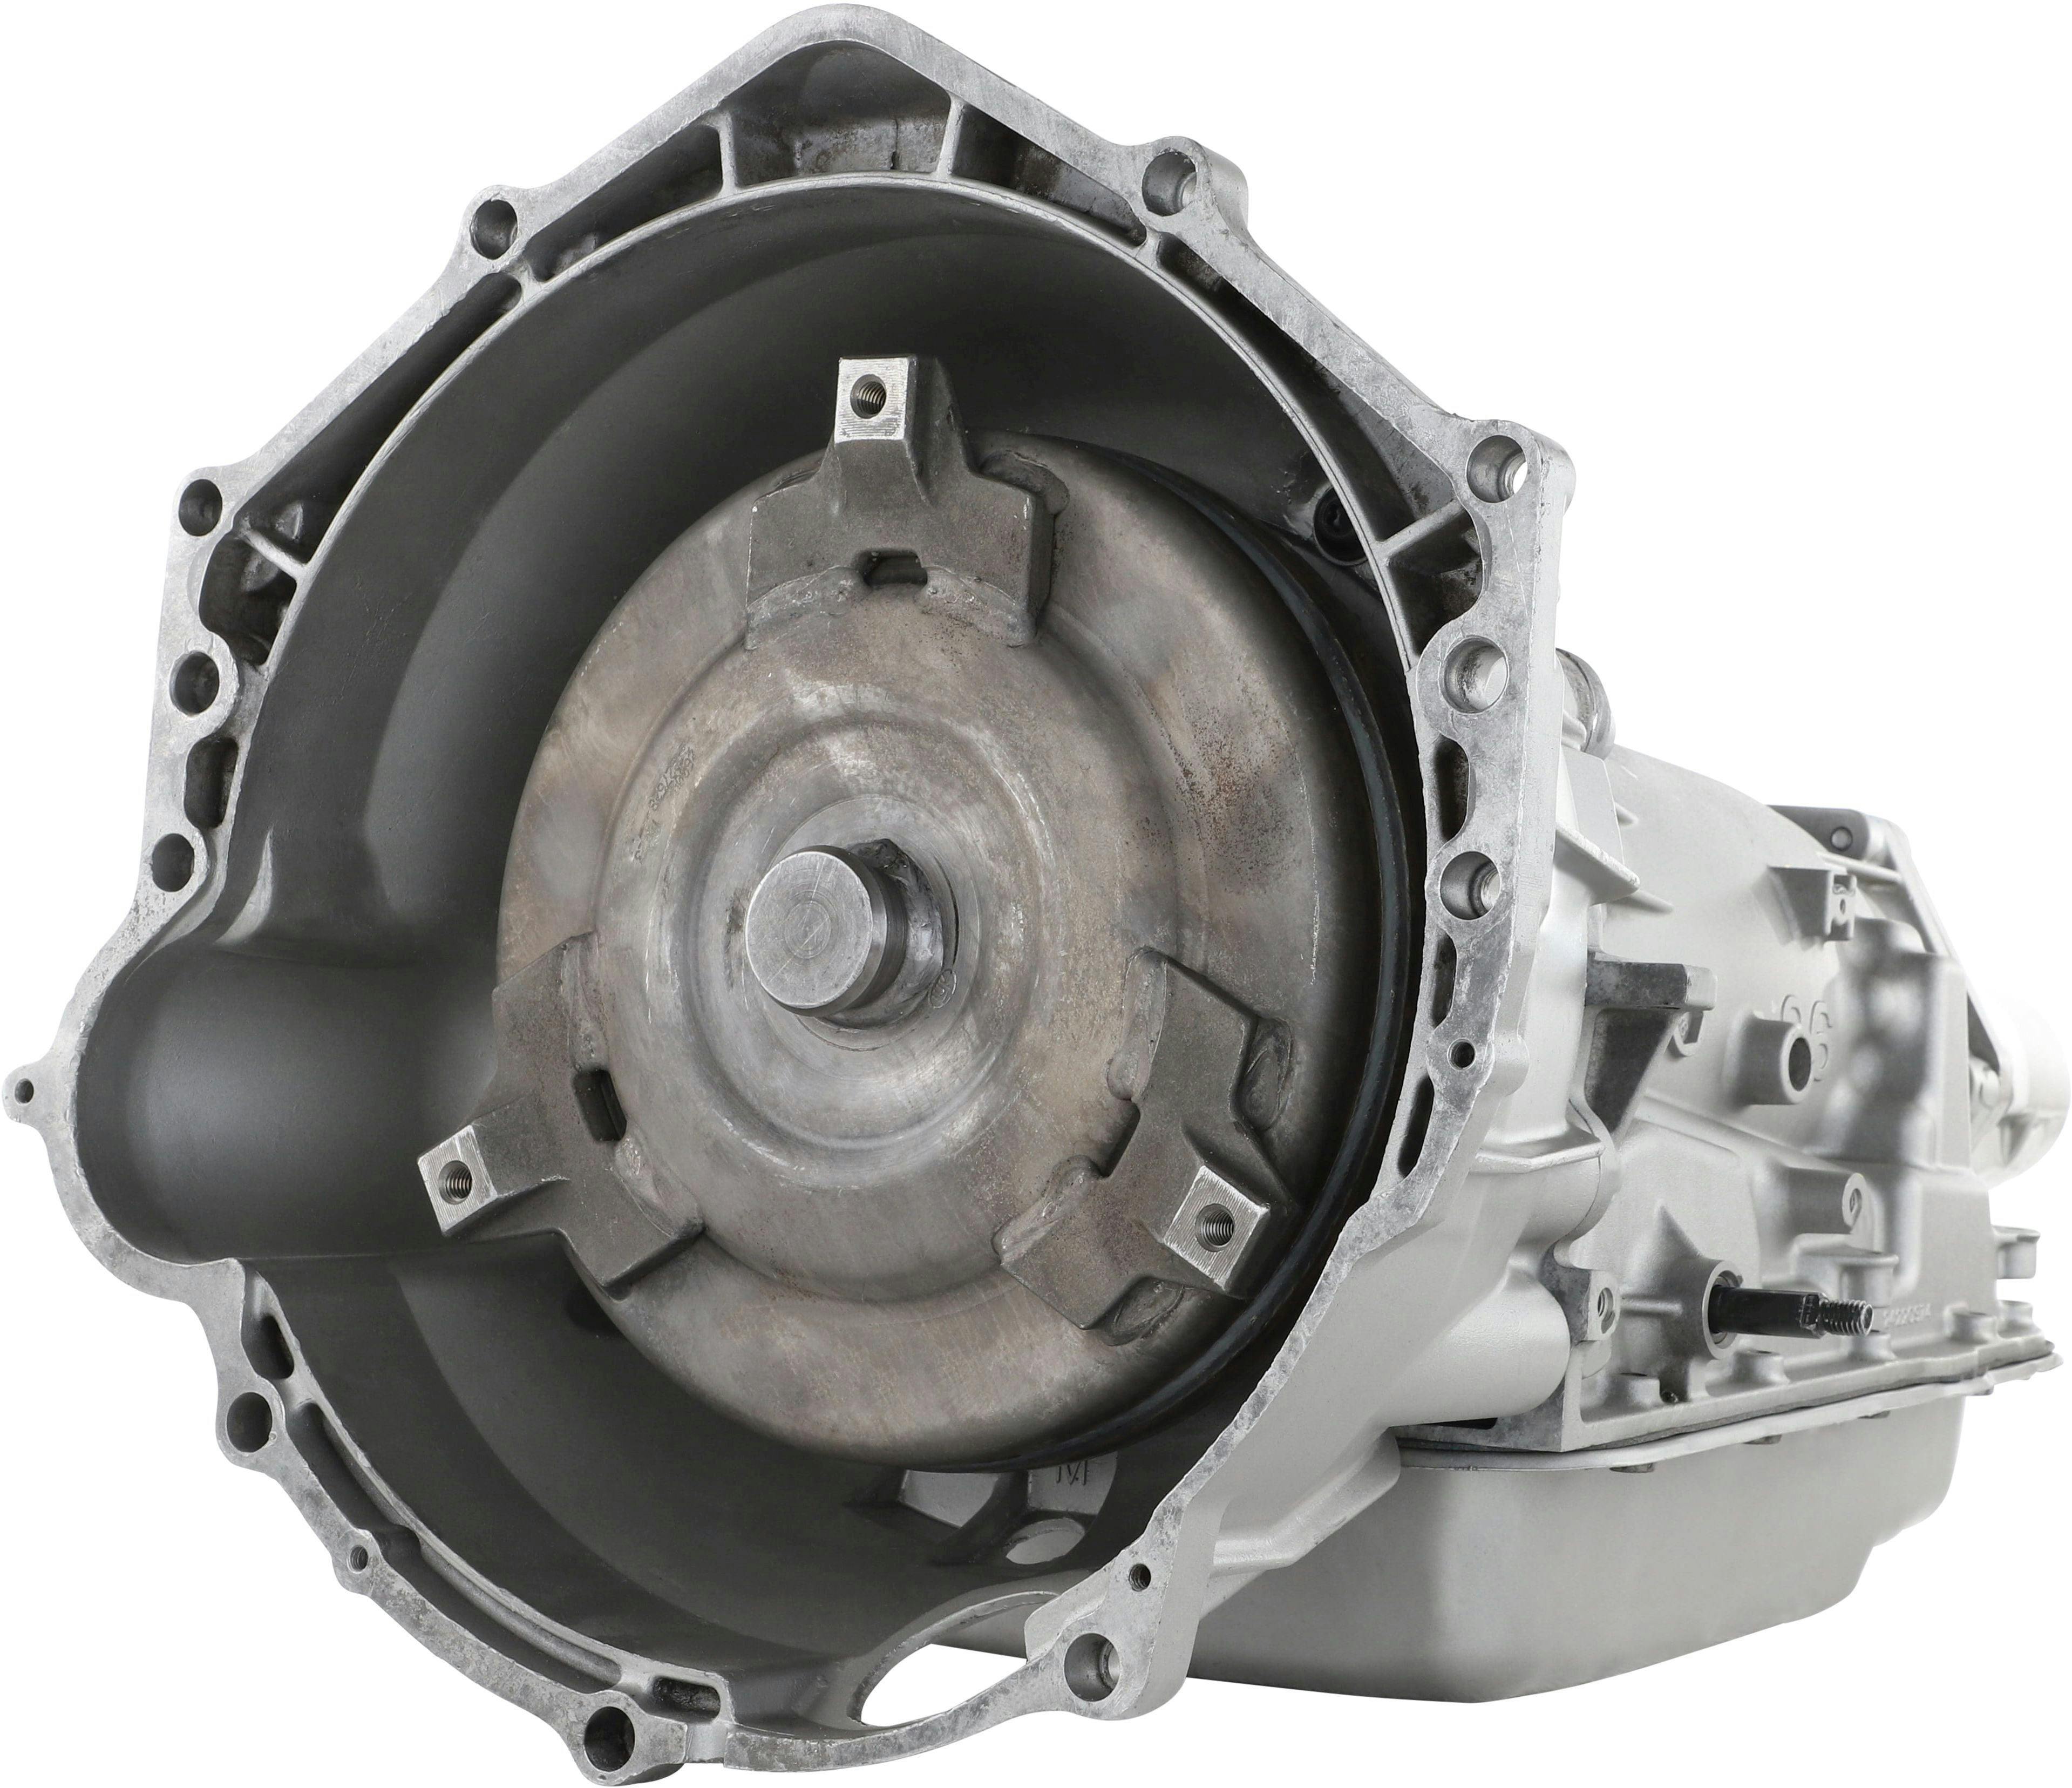 Automatic Transmission for 2005 Chevrolet Astro/Blazer and GMC Safari RWD with 4.3L V6 Engine